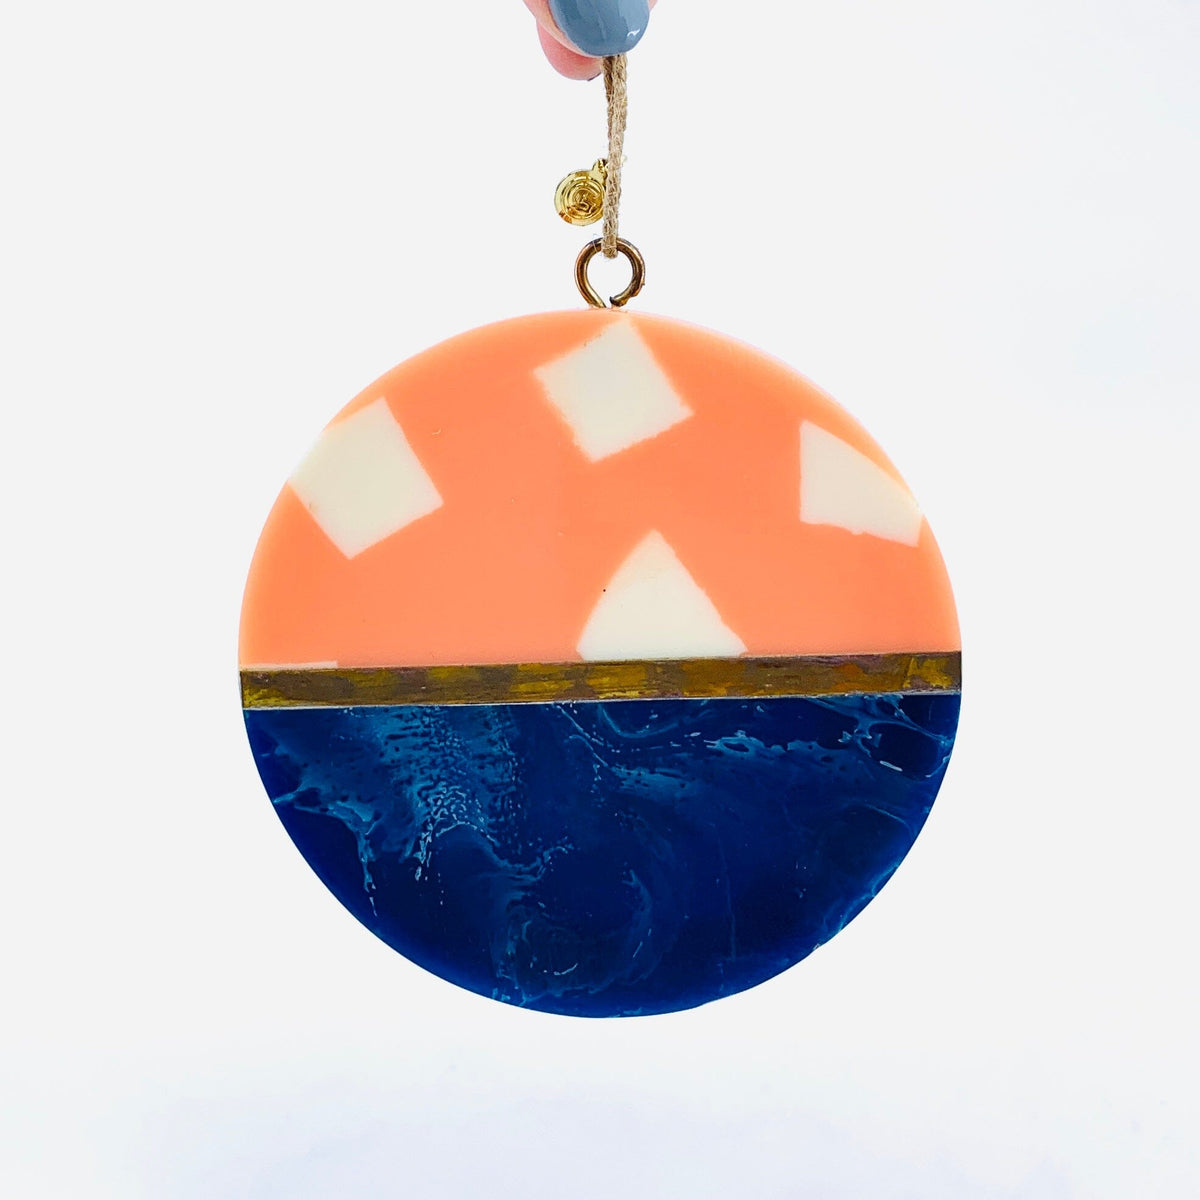 Coaster Ornaments Ornament One Hundred 80 Degrees 